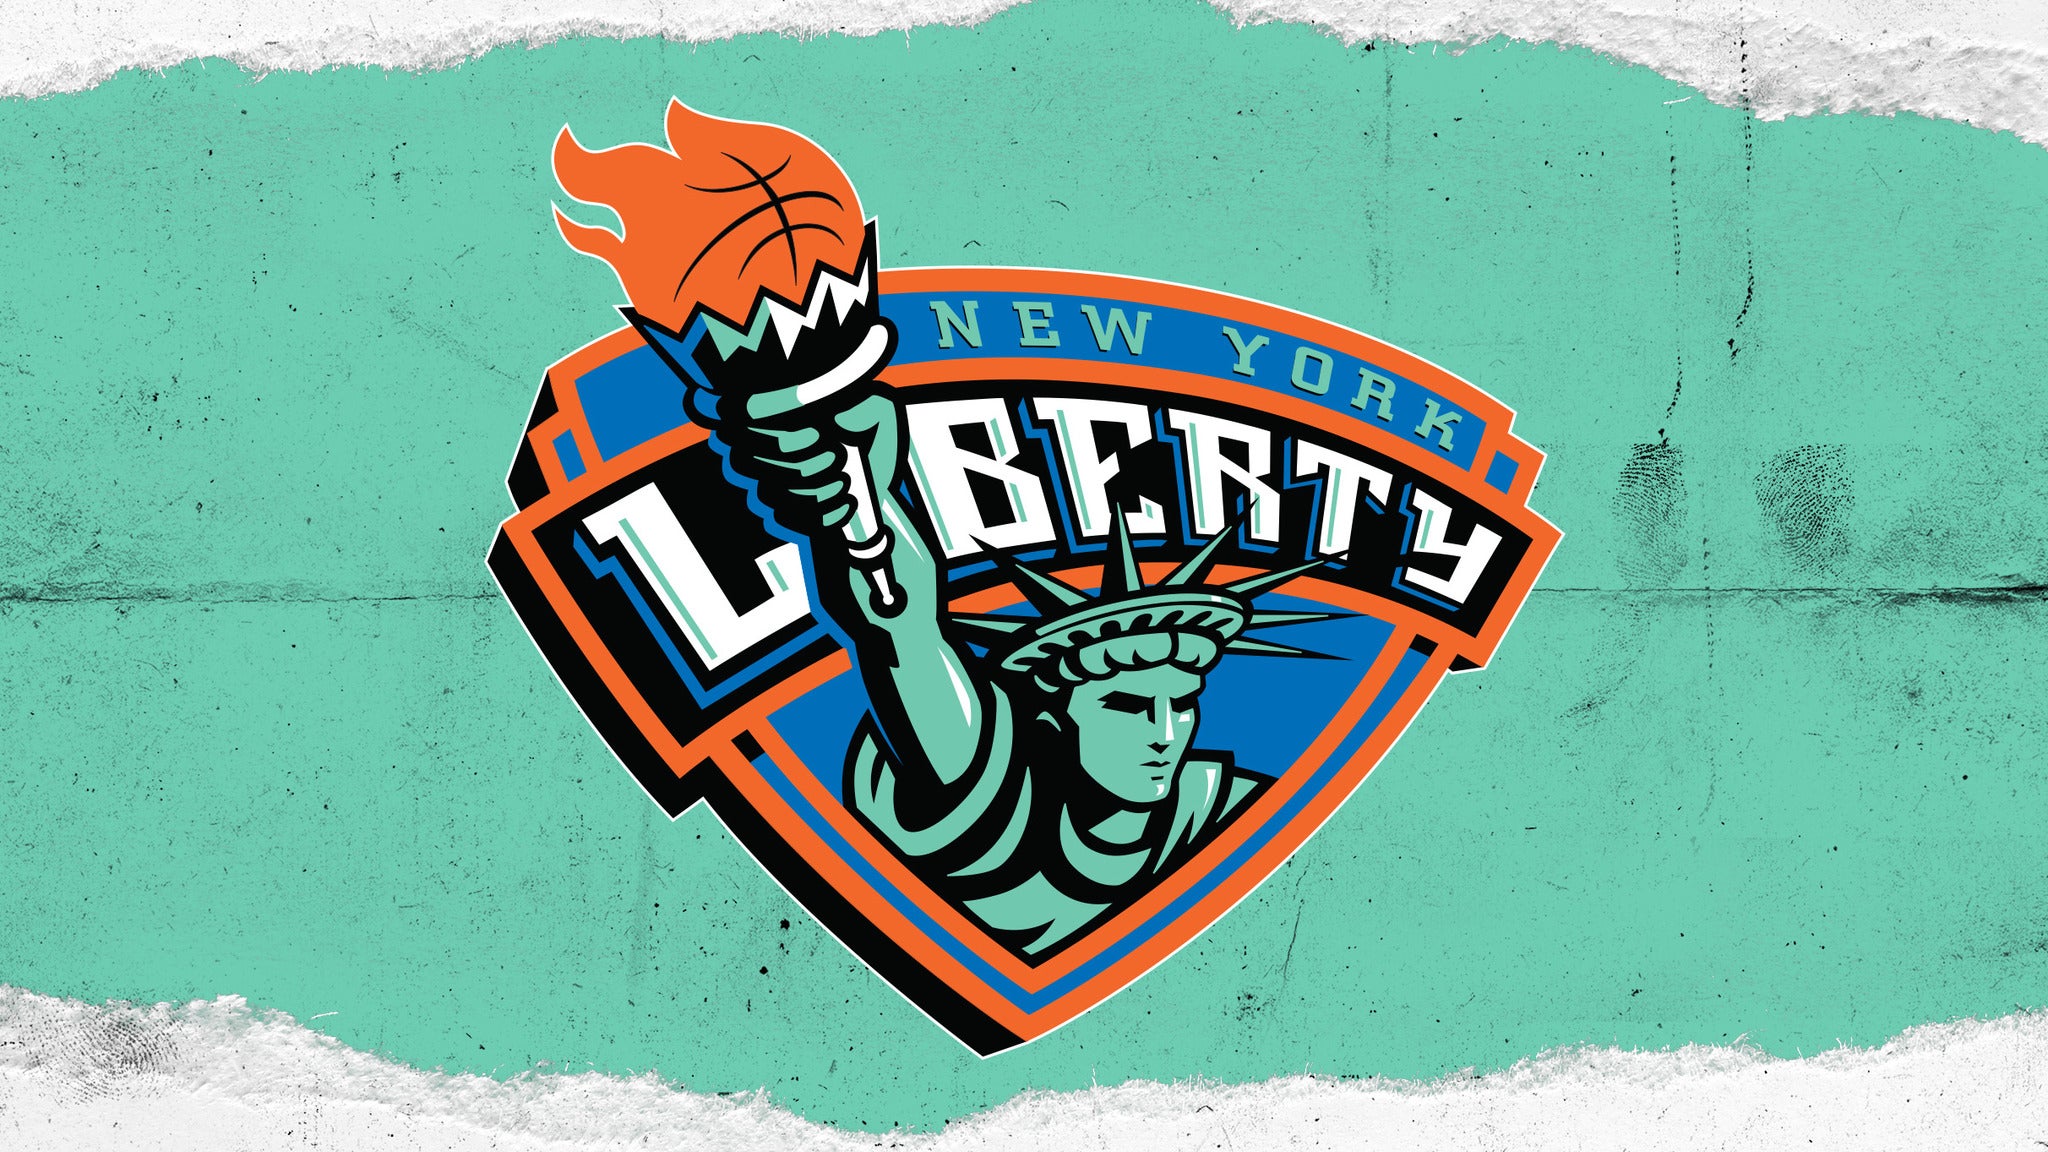 New York Liberty vs. Chicago Sky (Suite) August 11, 2023 at Barclays